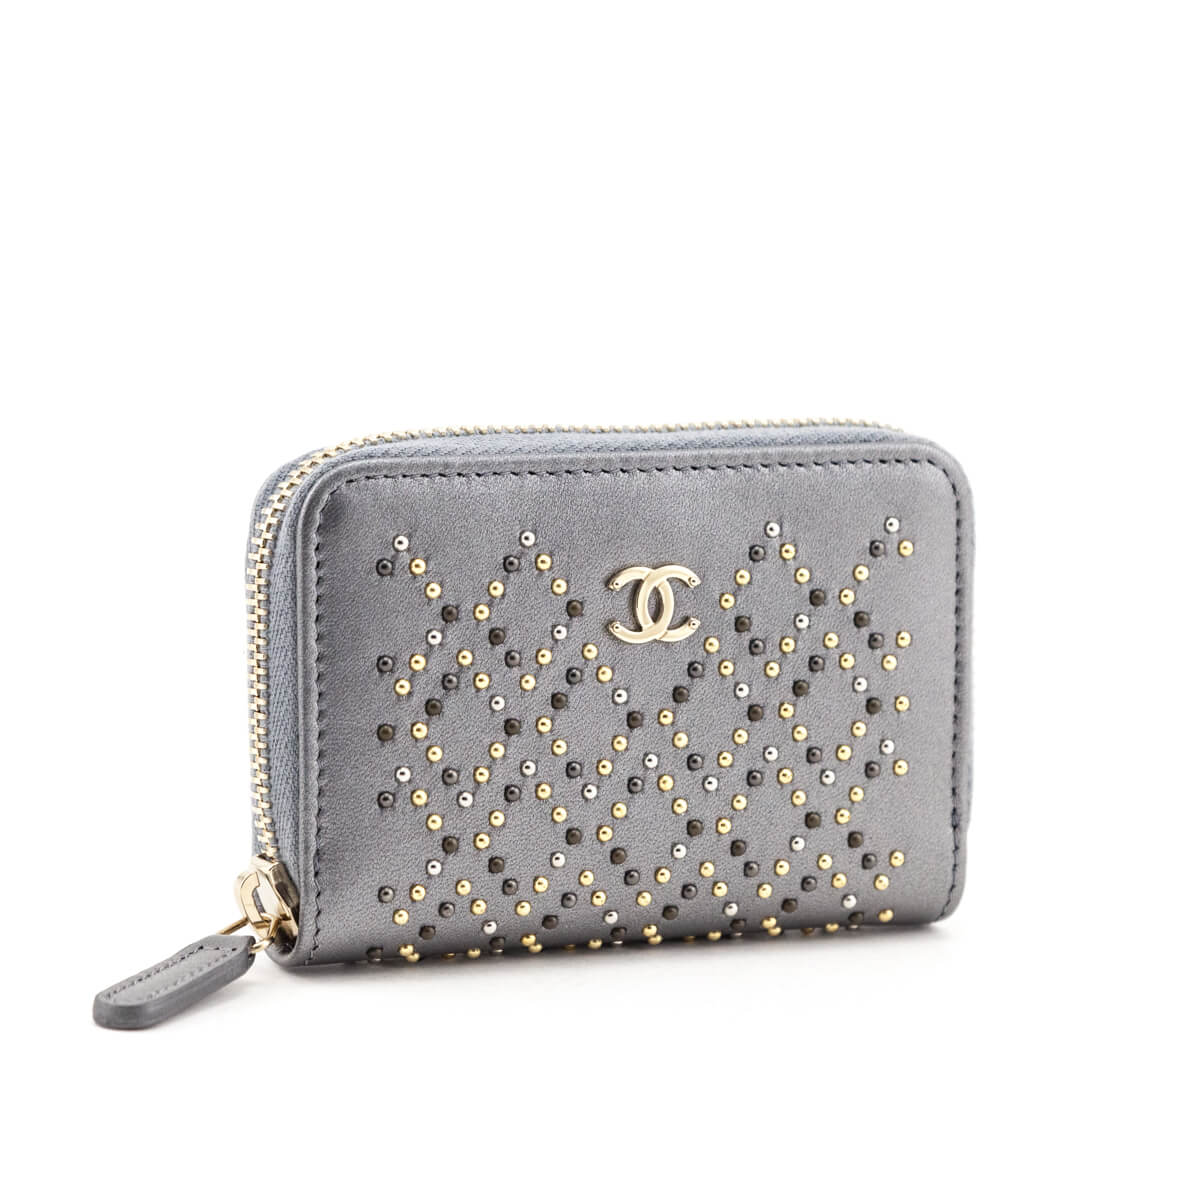 Chanel Metallic Gray Leather Studded Zip Coin Purse Wallet - Love that Bag etc - Preowned Authentic Designer Handbags & Preloved Fashions